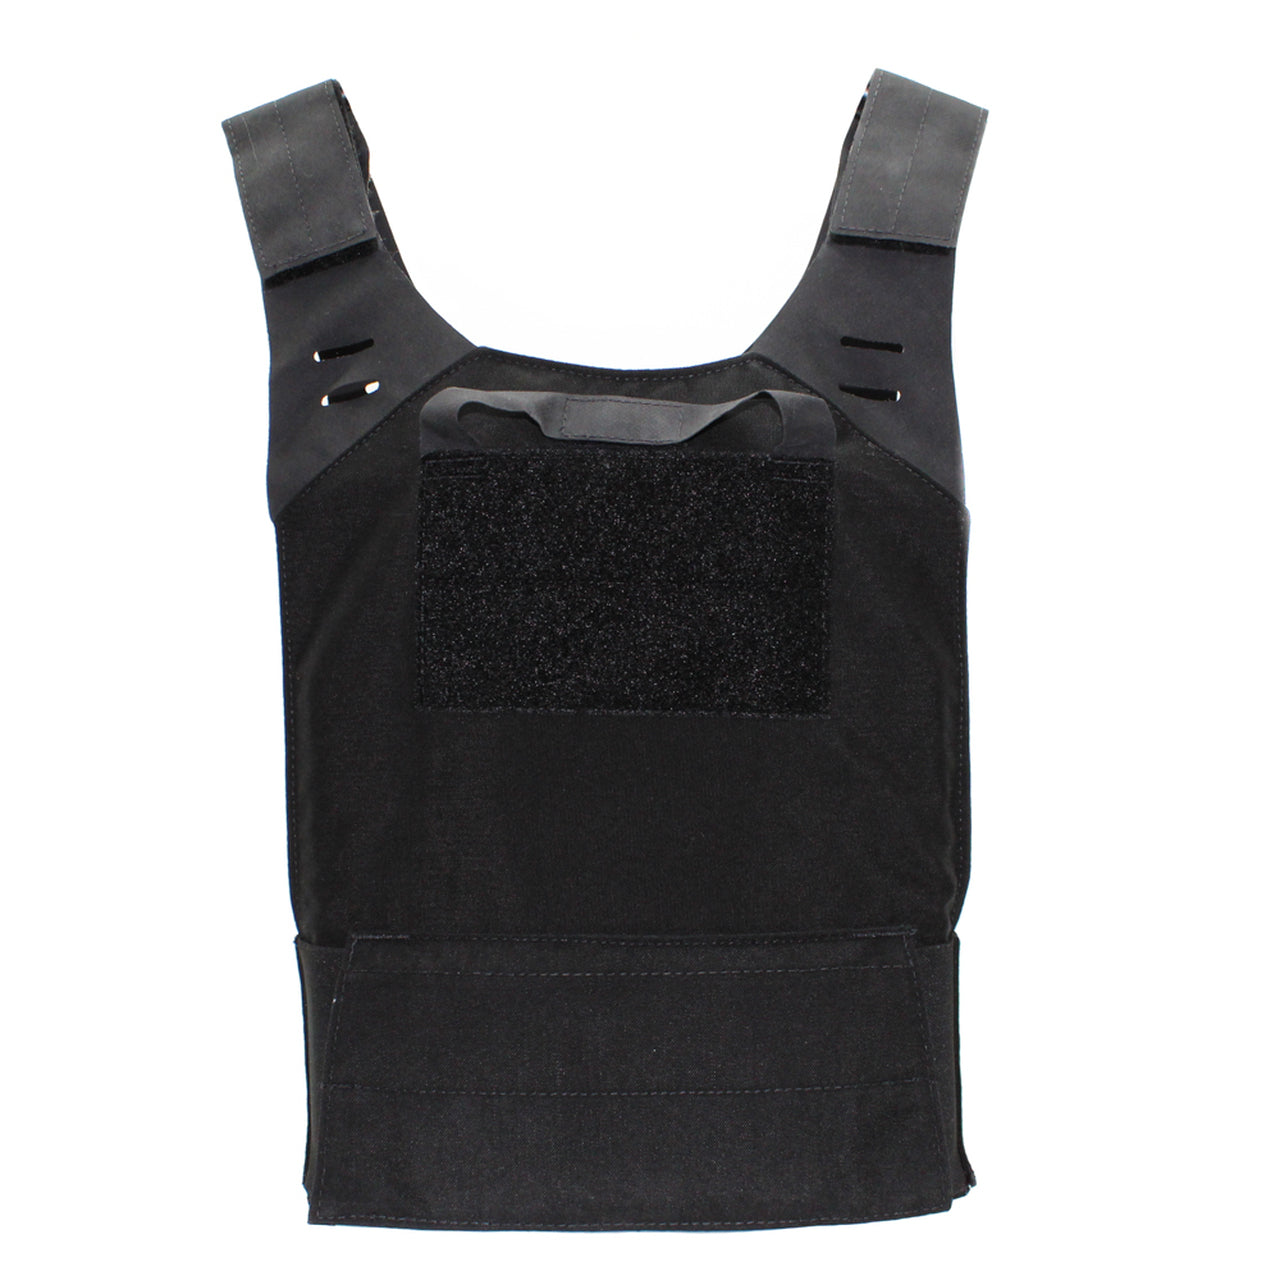 A Shellback Tactical Stealth Low Vis Plate Carrier with two pockets on the front.